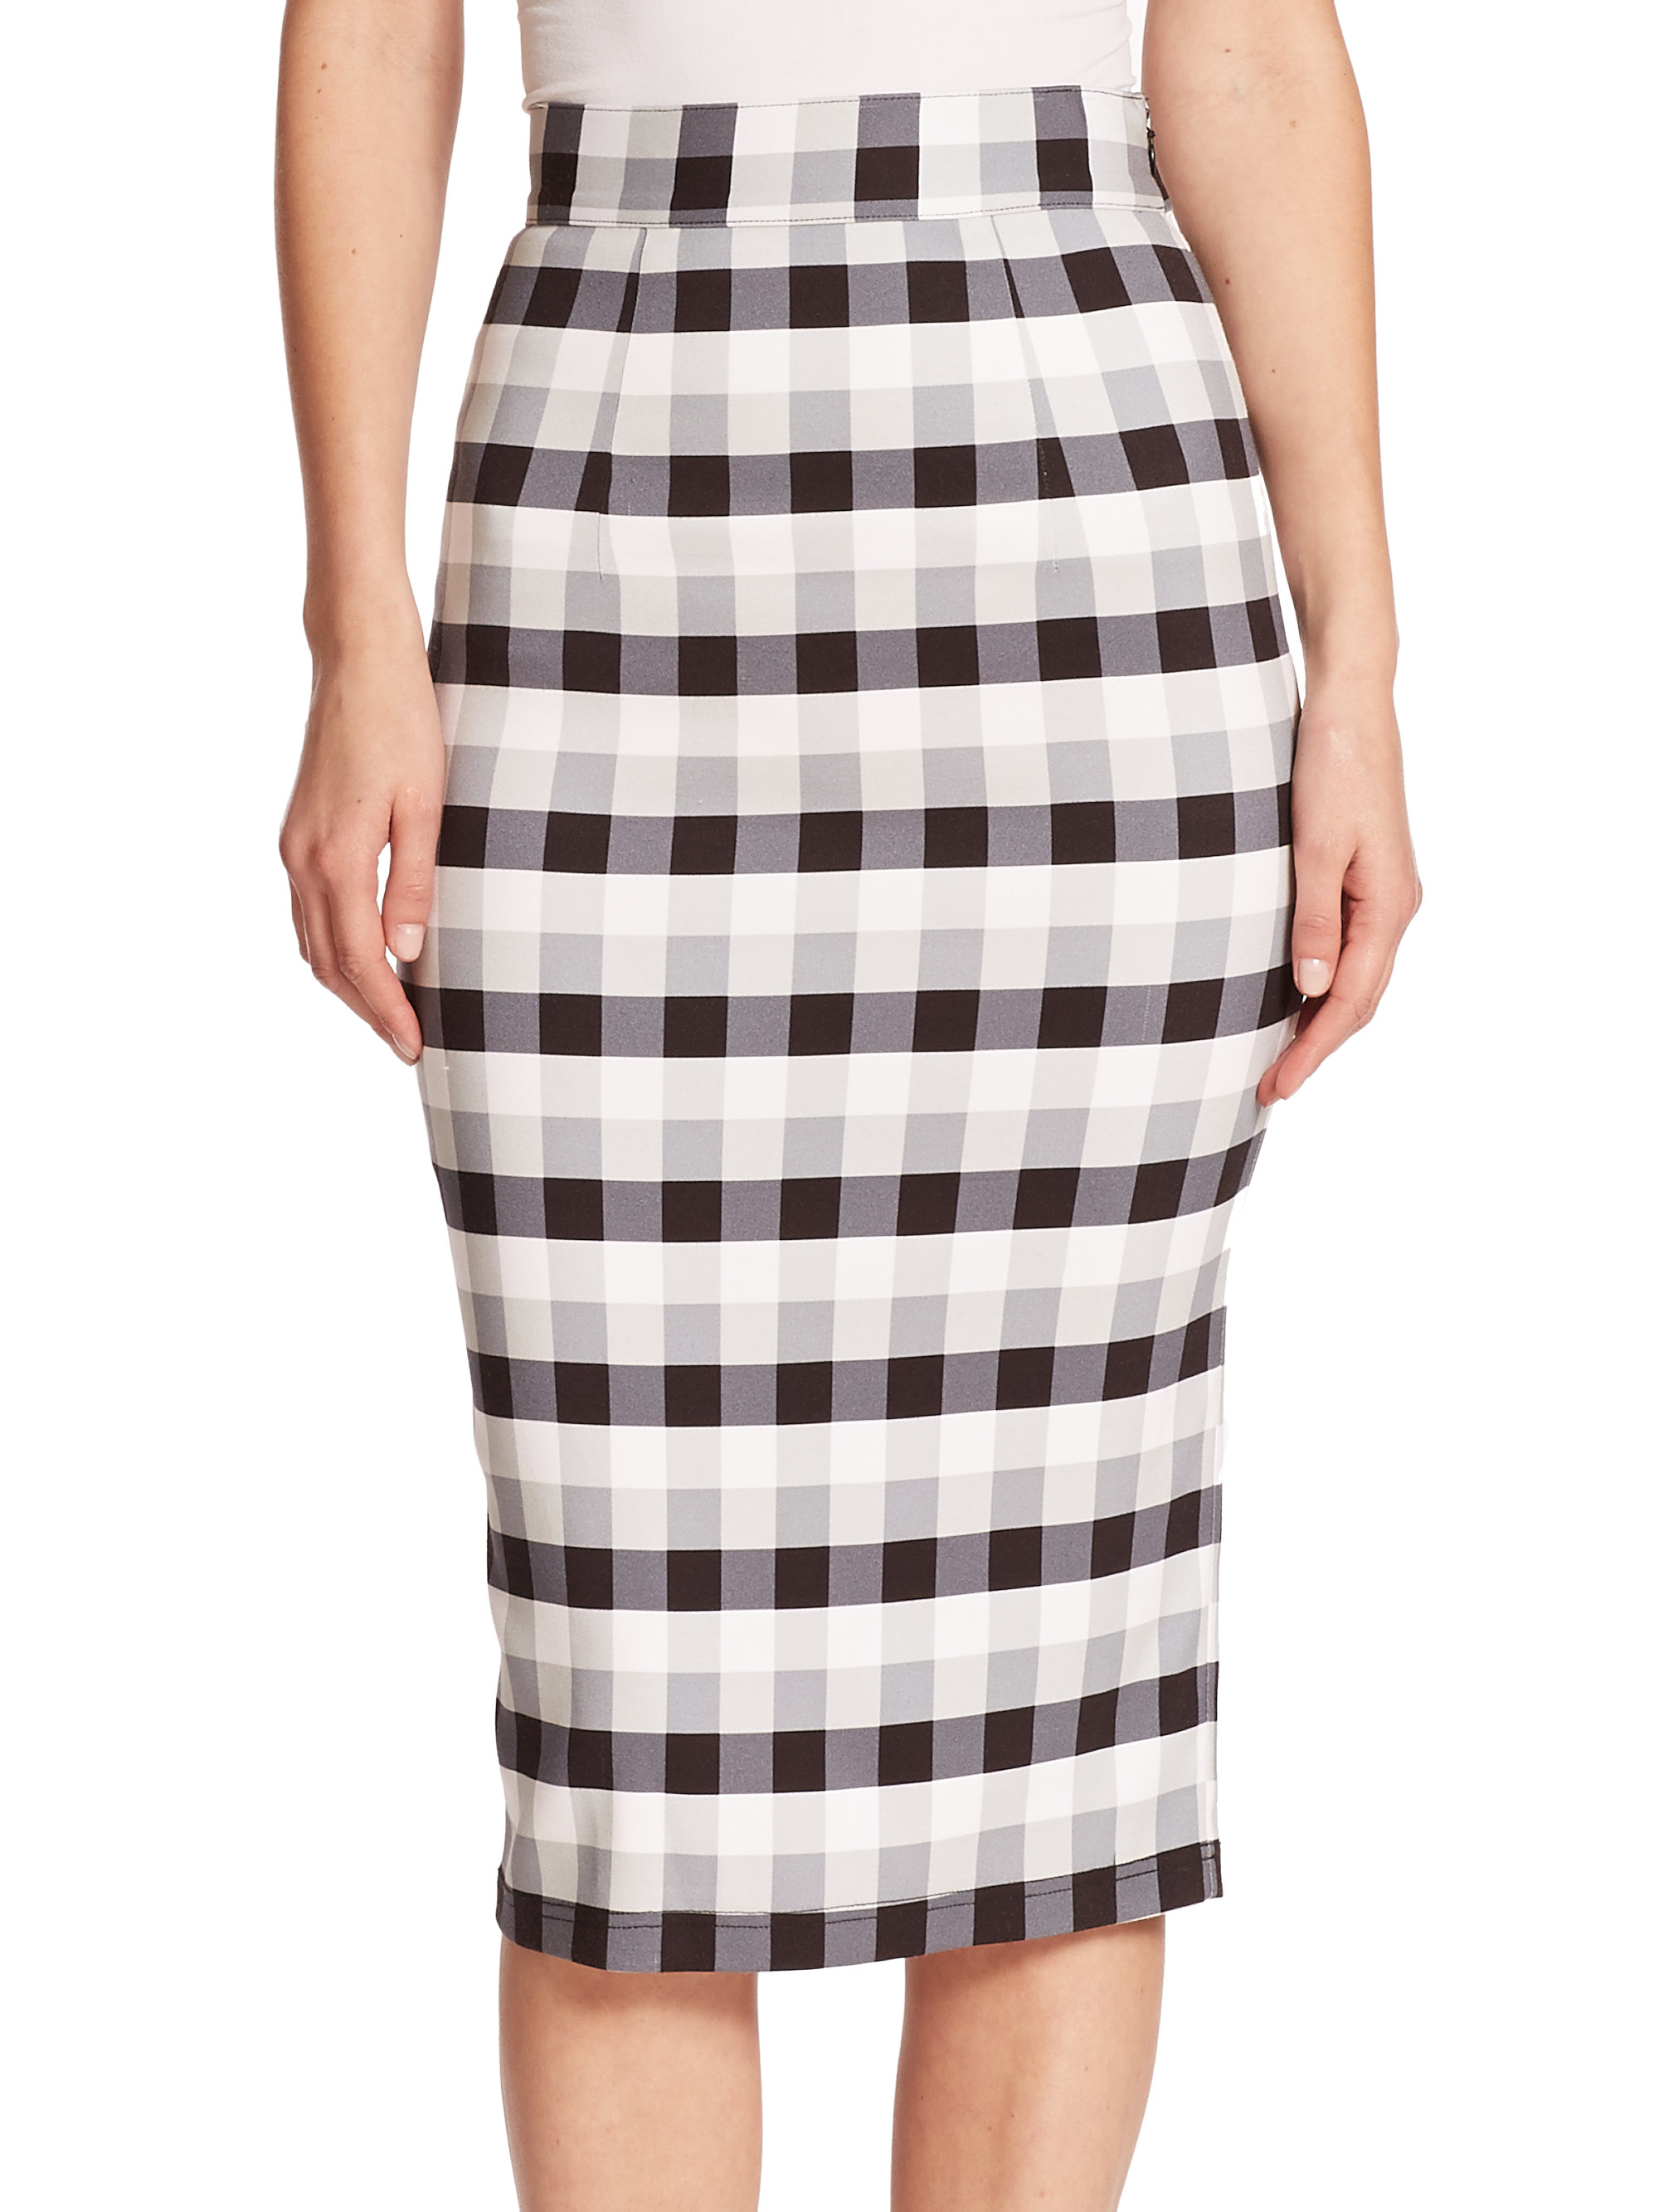 Lyst - Tanya Taylor Peggy Checked Midi Skirt in Gray